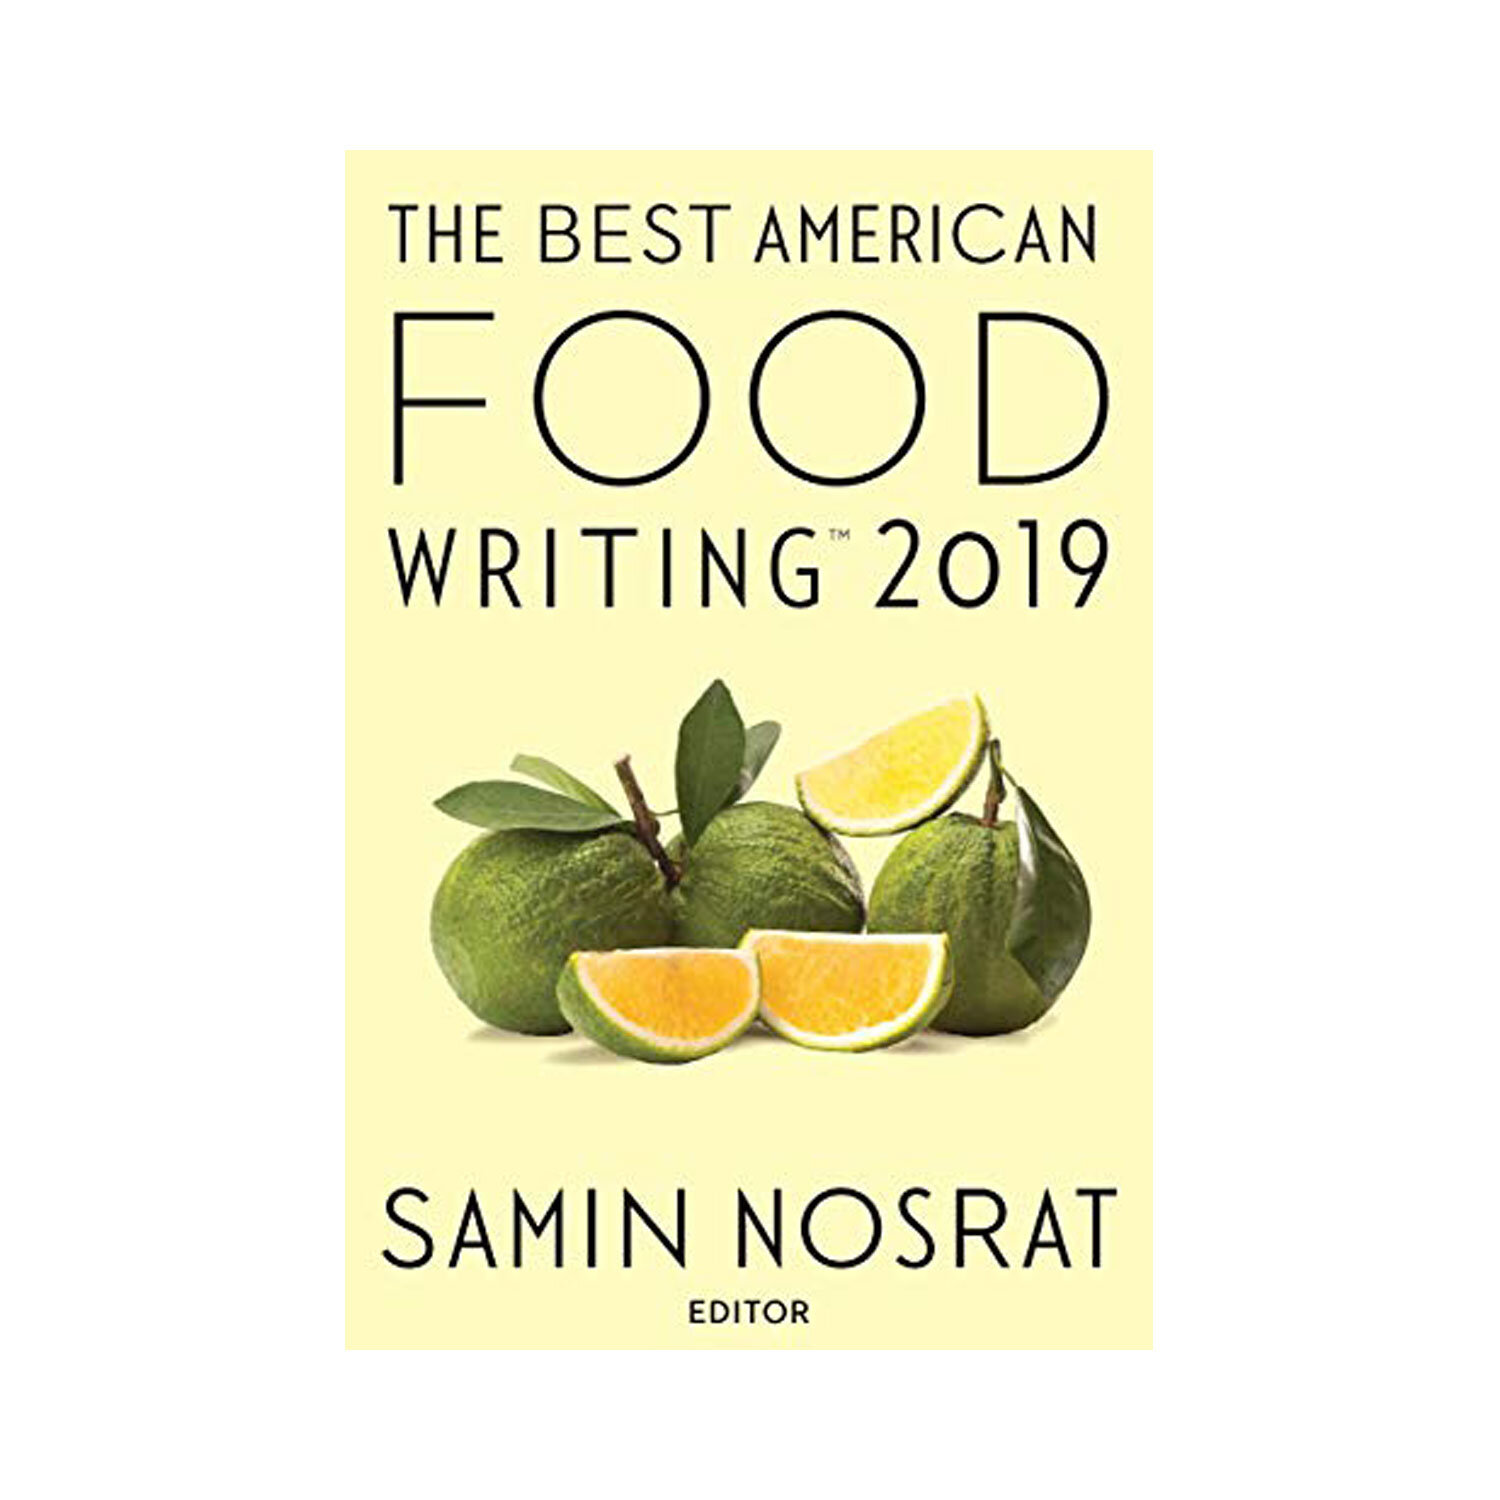 The Best American Food Writing 2019 edited by Samin Nostrat